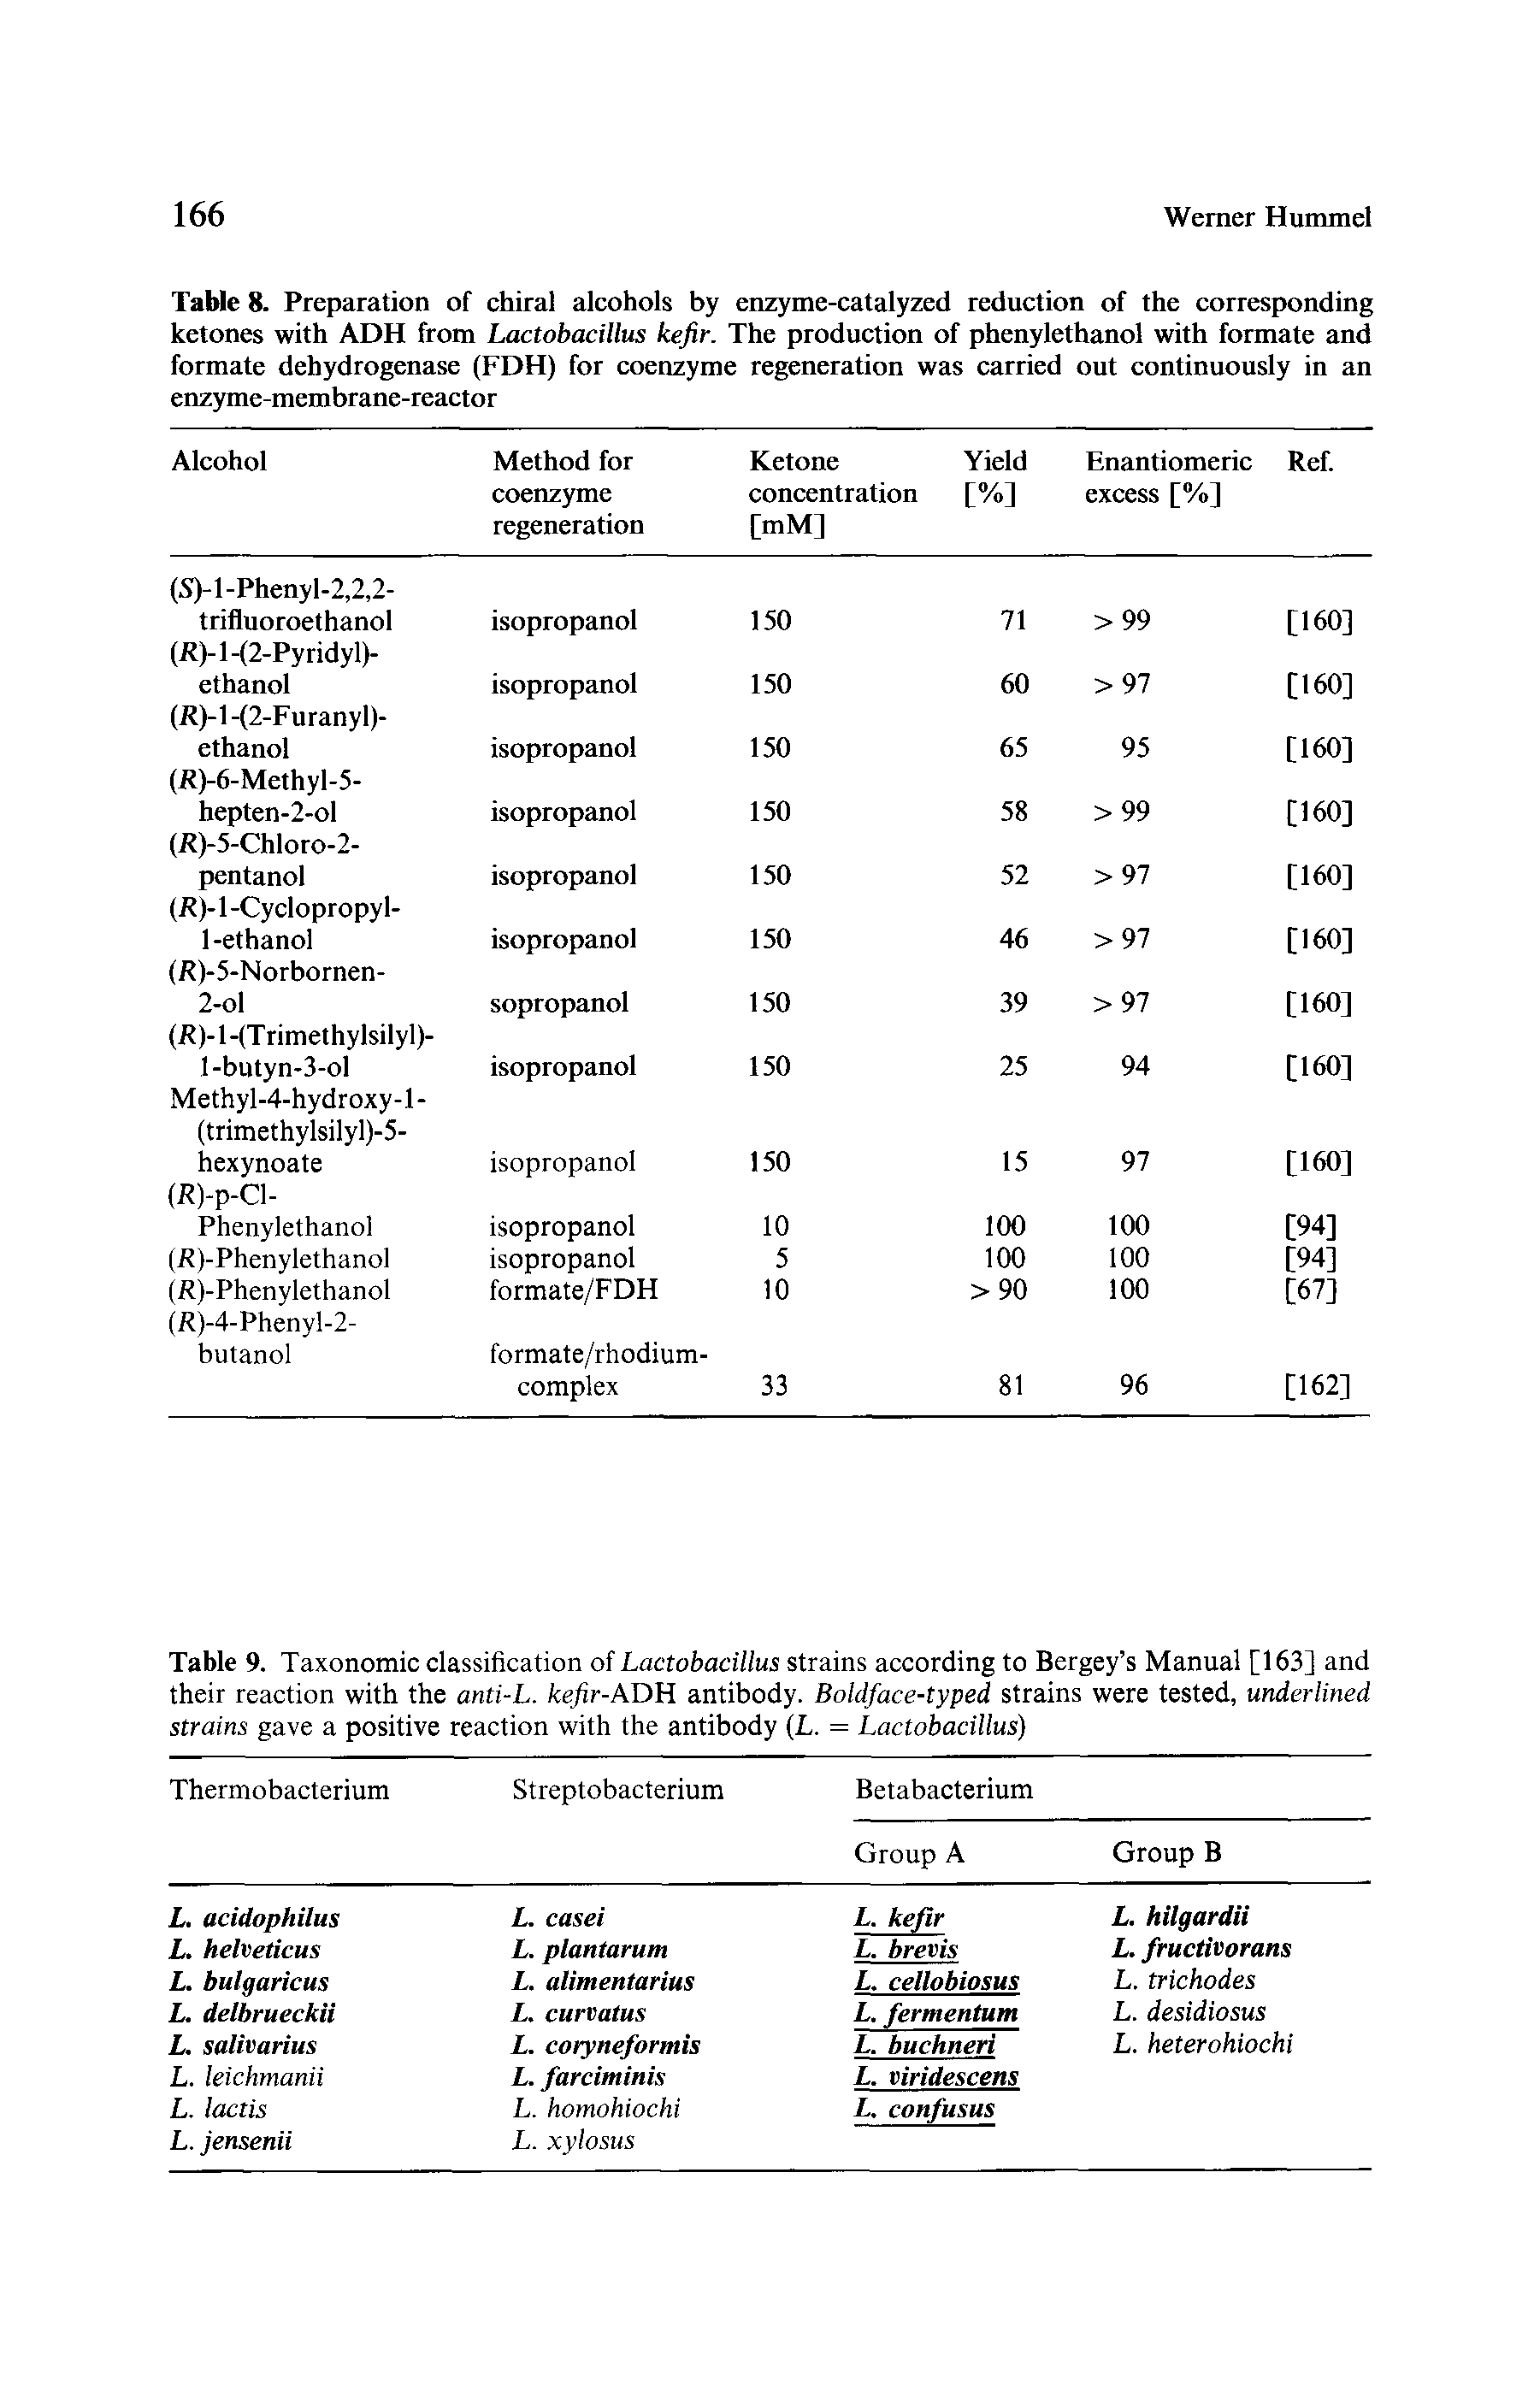 Table 9. Taxonomic classification of Lactobacillus strains according to Bergey s Manual [163] and their reaction with the anti-L. kefir-ADH antibody. Boldface-typed strains were tested, underlined strains gave a positive reaction with the antibody (L. = Lactobacillus)...